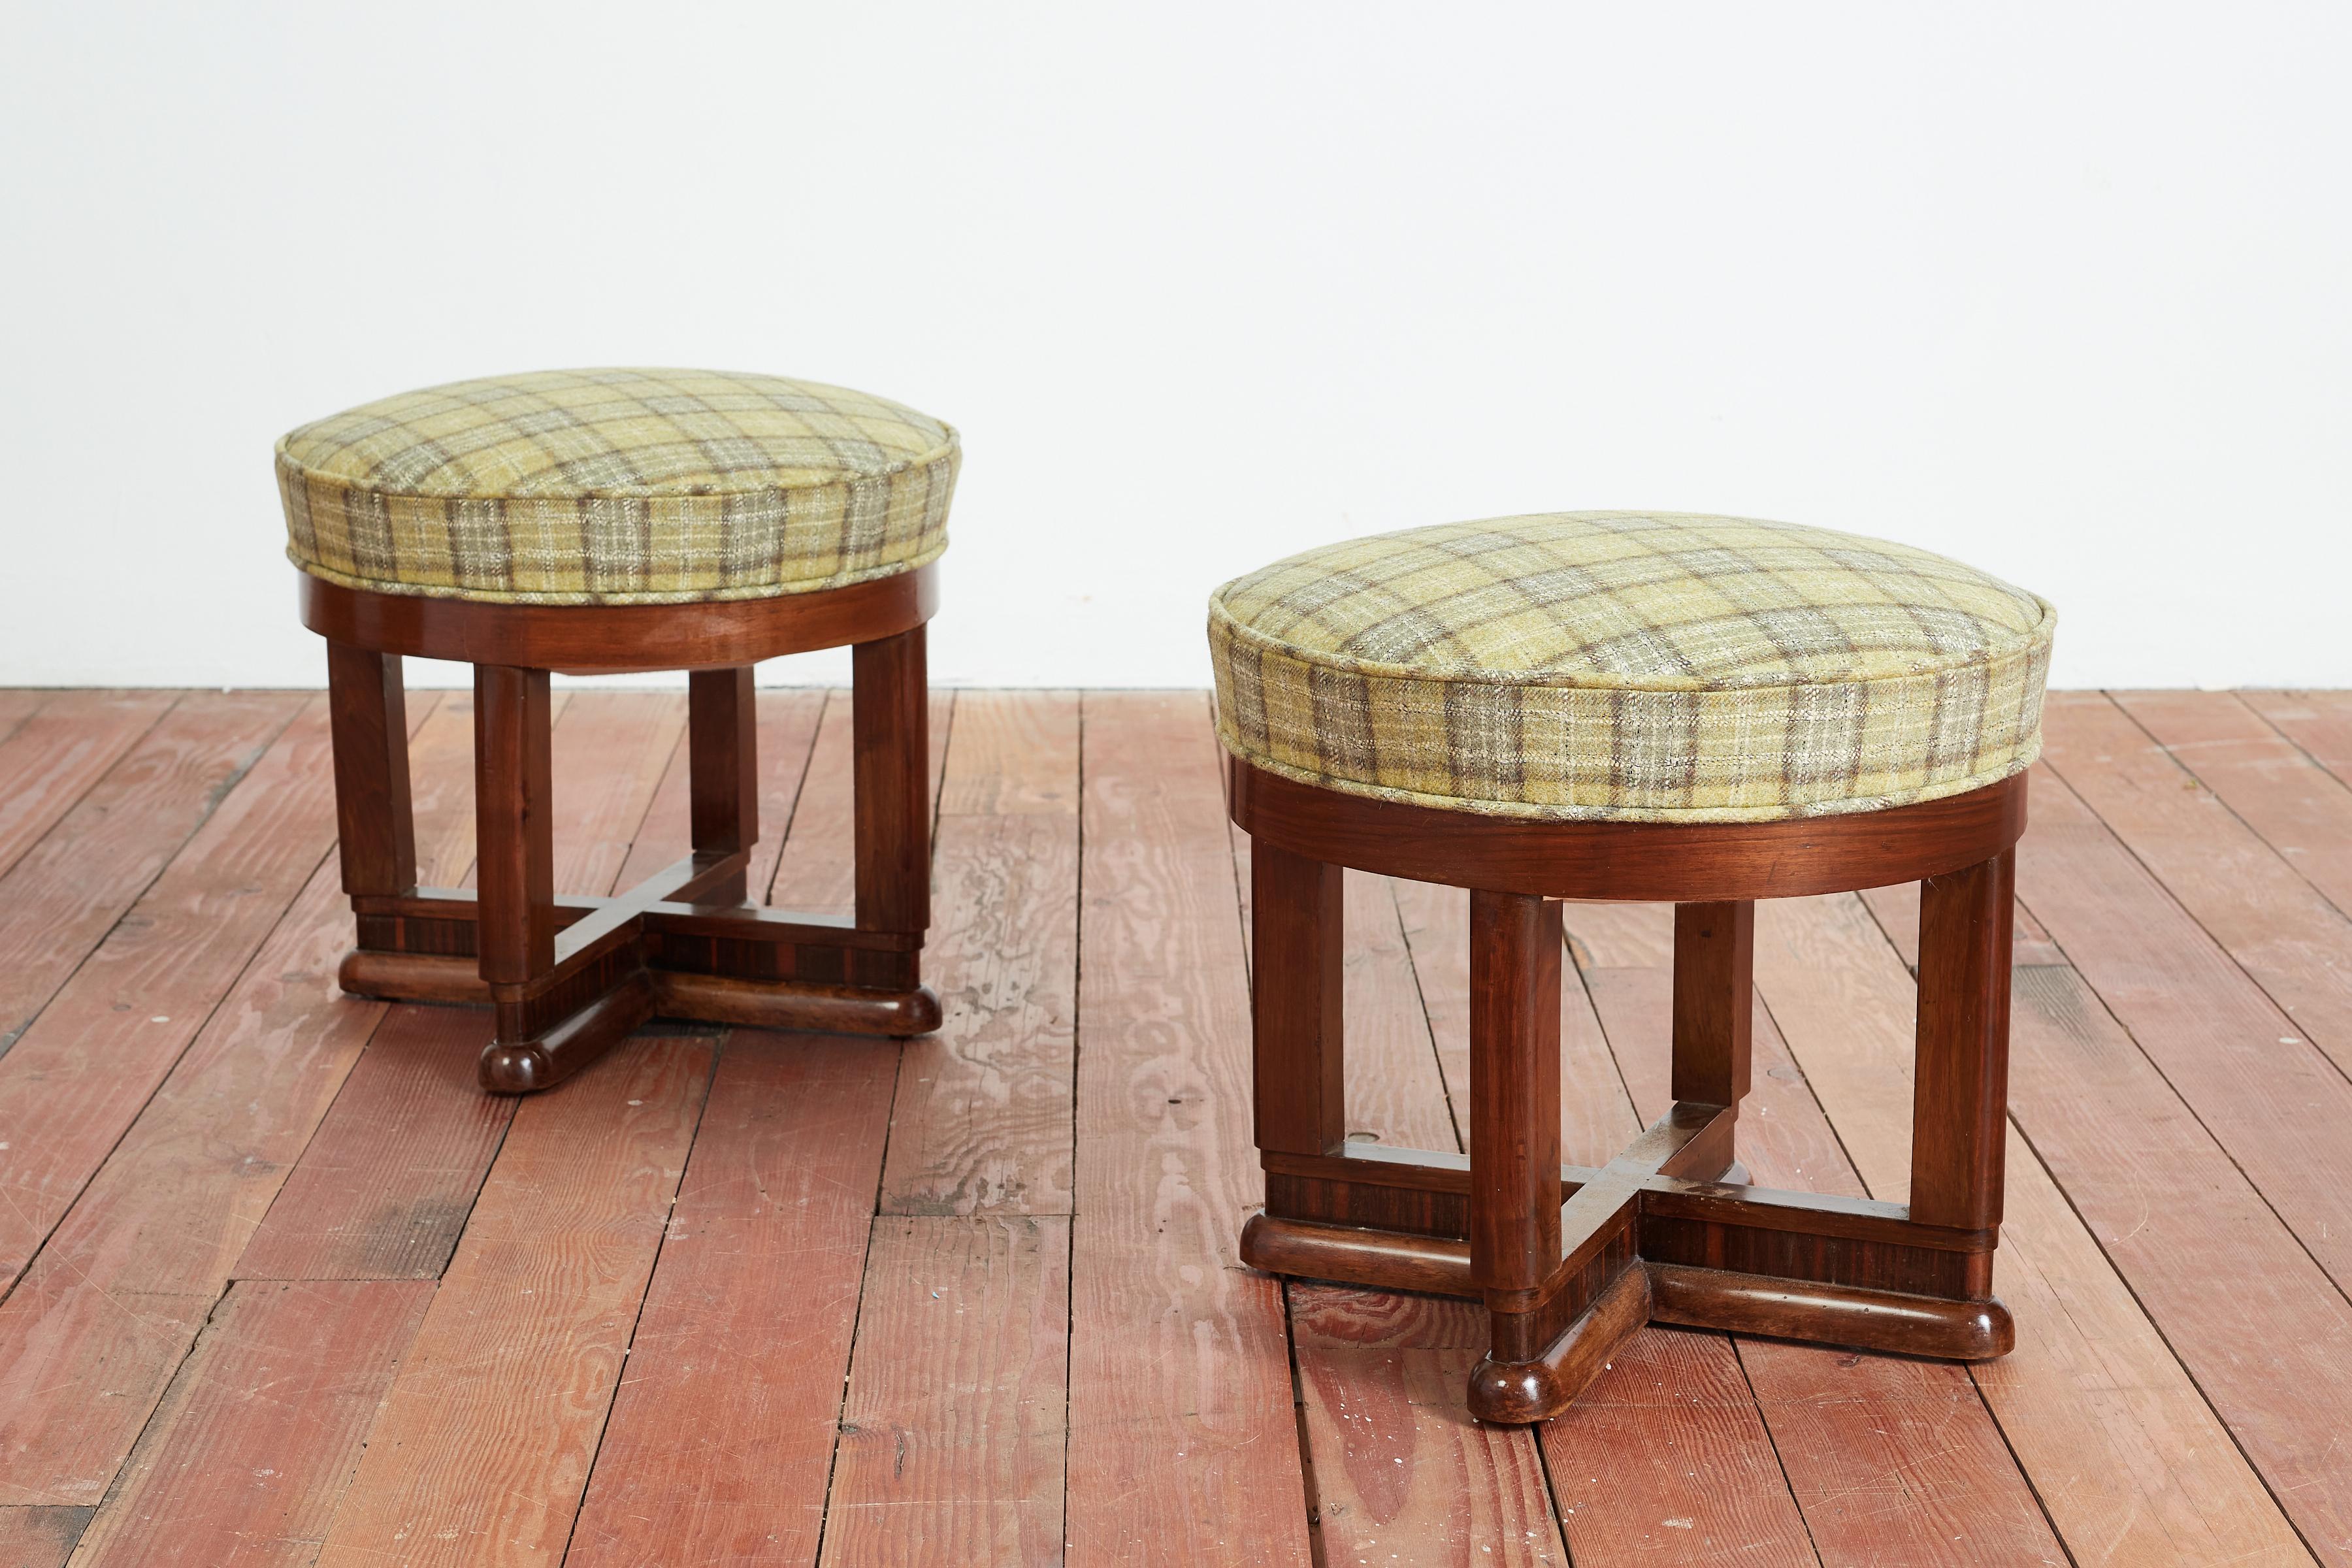 Wonderful pair of Osvaldo Borsani ottomans newly upholstered in green tartan wool fabric.
Wonderful patina to rich mahogany wood bases with inlay and curved feet. 

Italy circa 1940s 